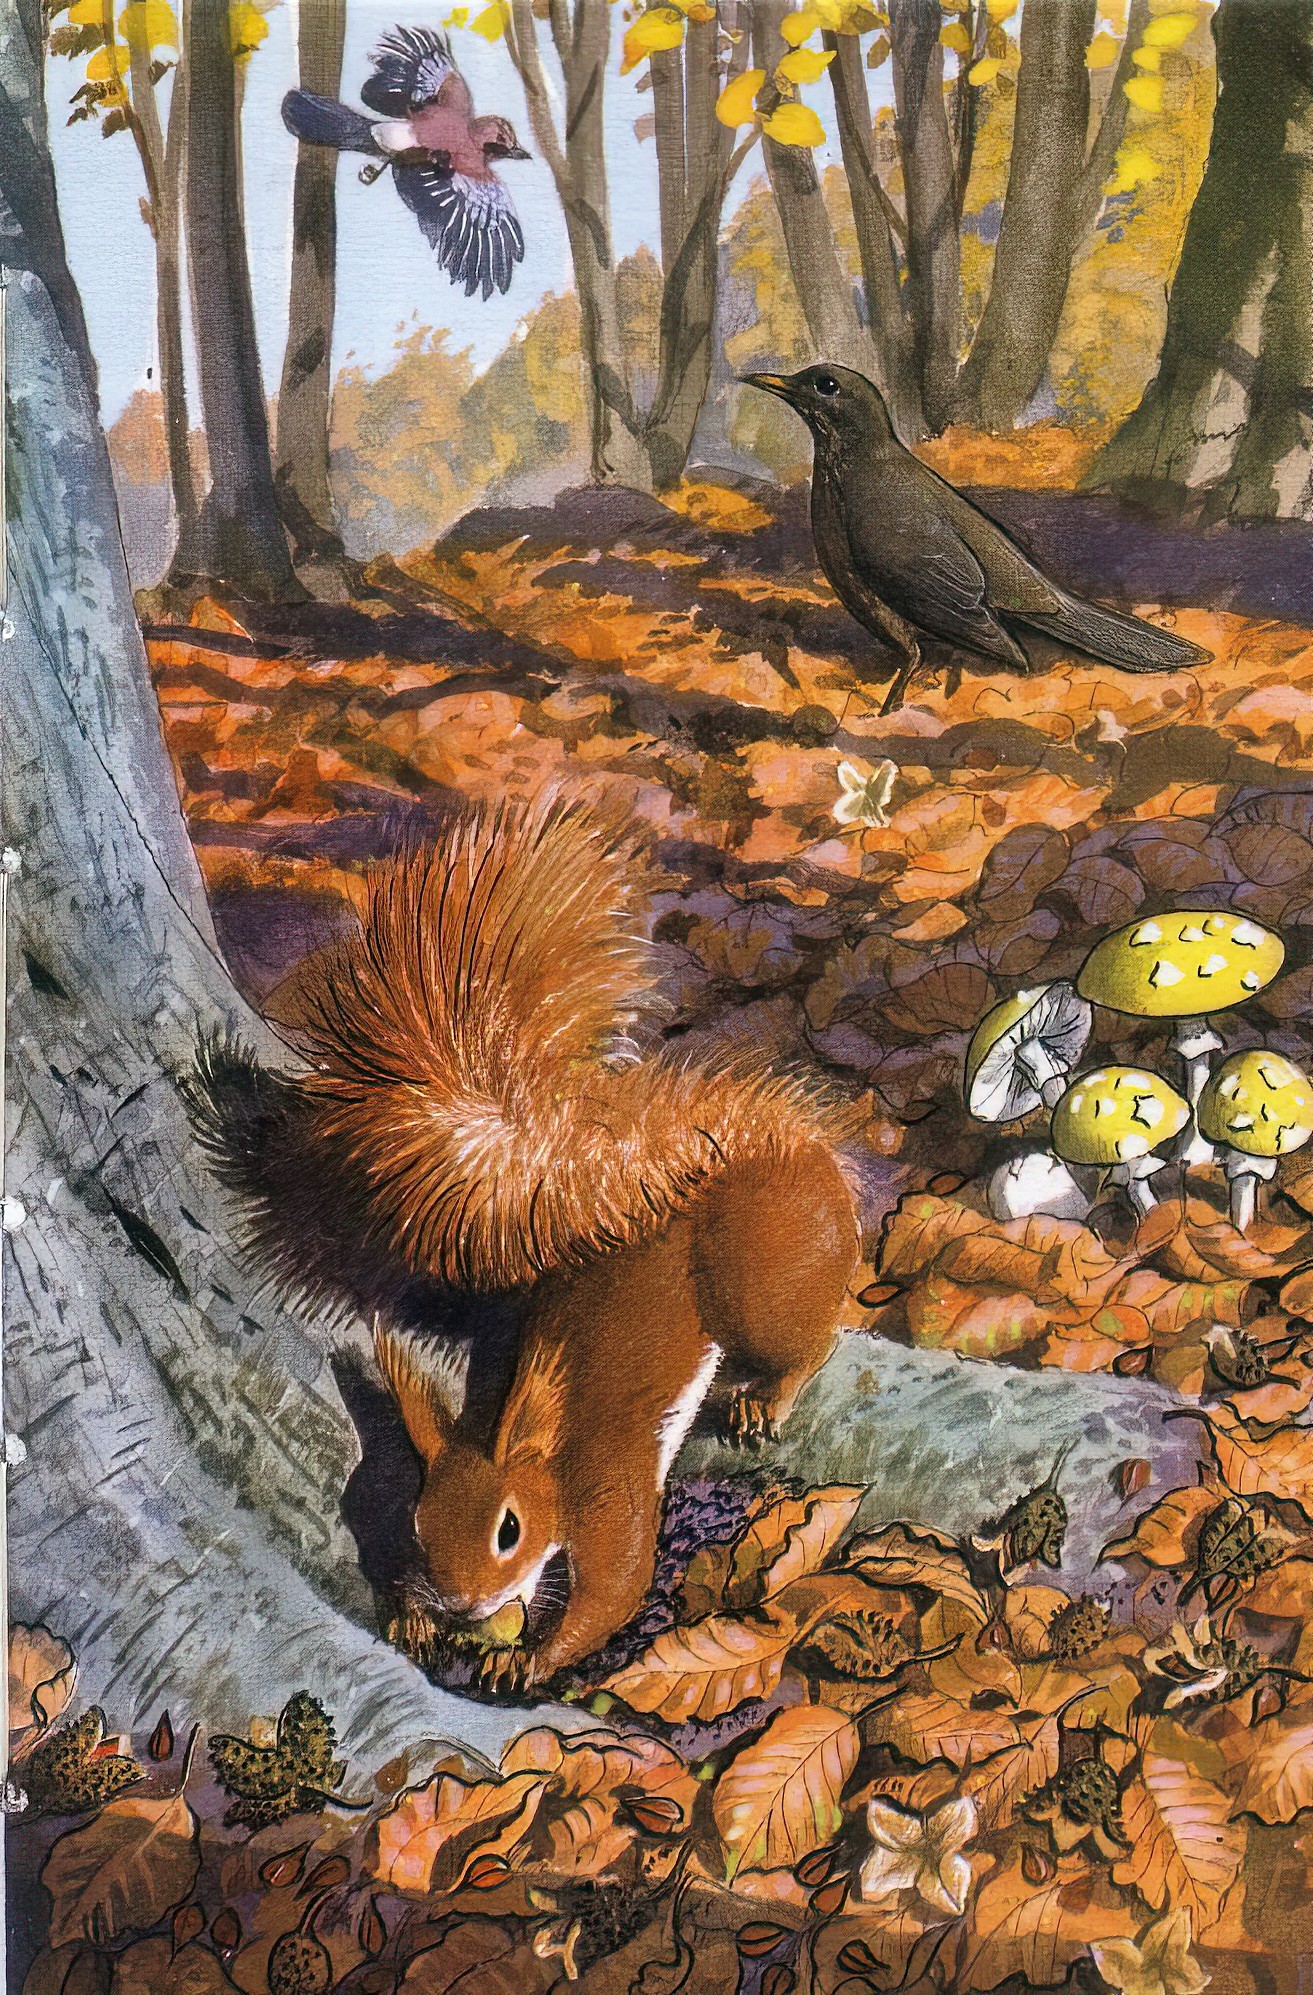 C.F.Tunnicliffe for What To Look For In Autumn (Ladybird) squirrel